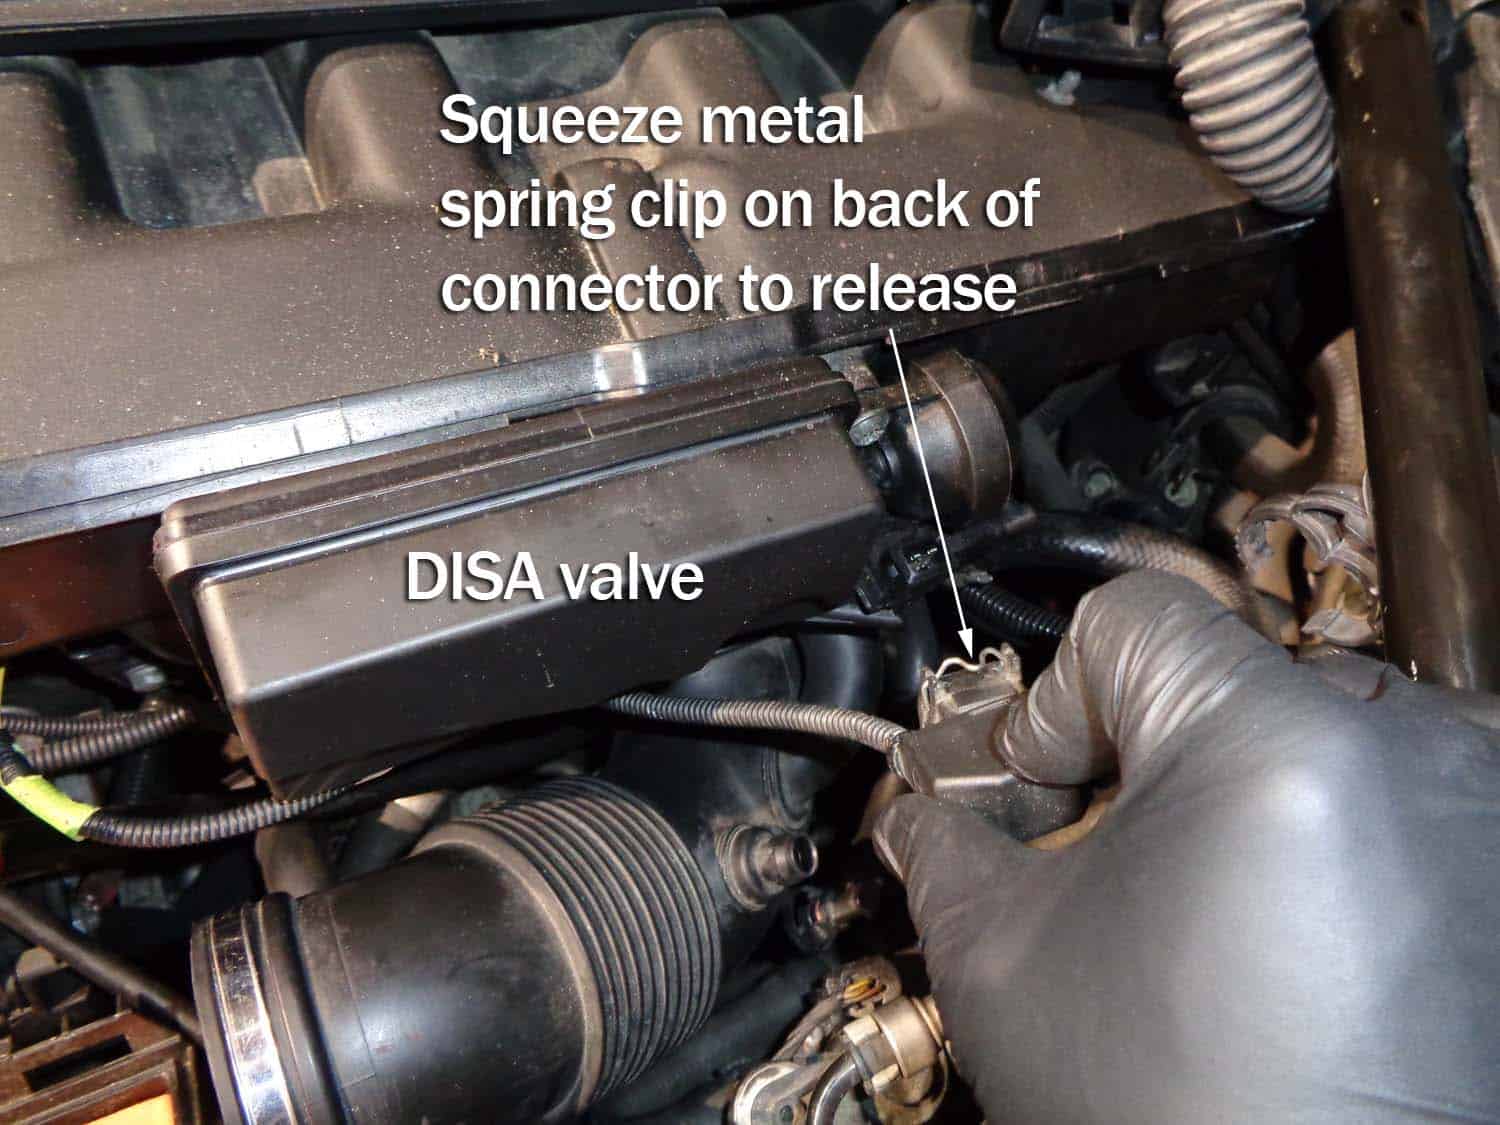 bmw e60 intake boot repair - disconnect the electrical connection from the DISA valve